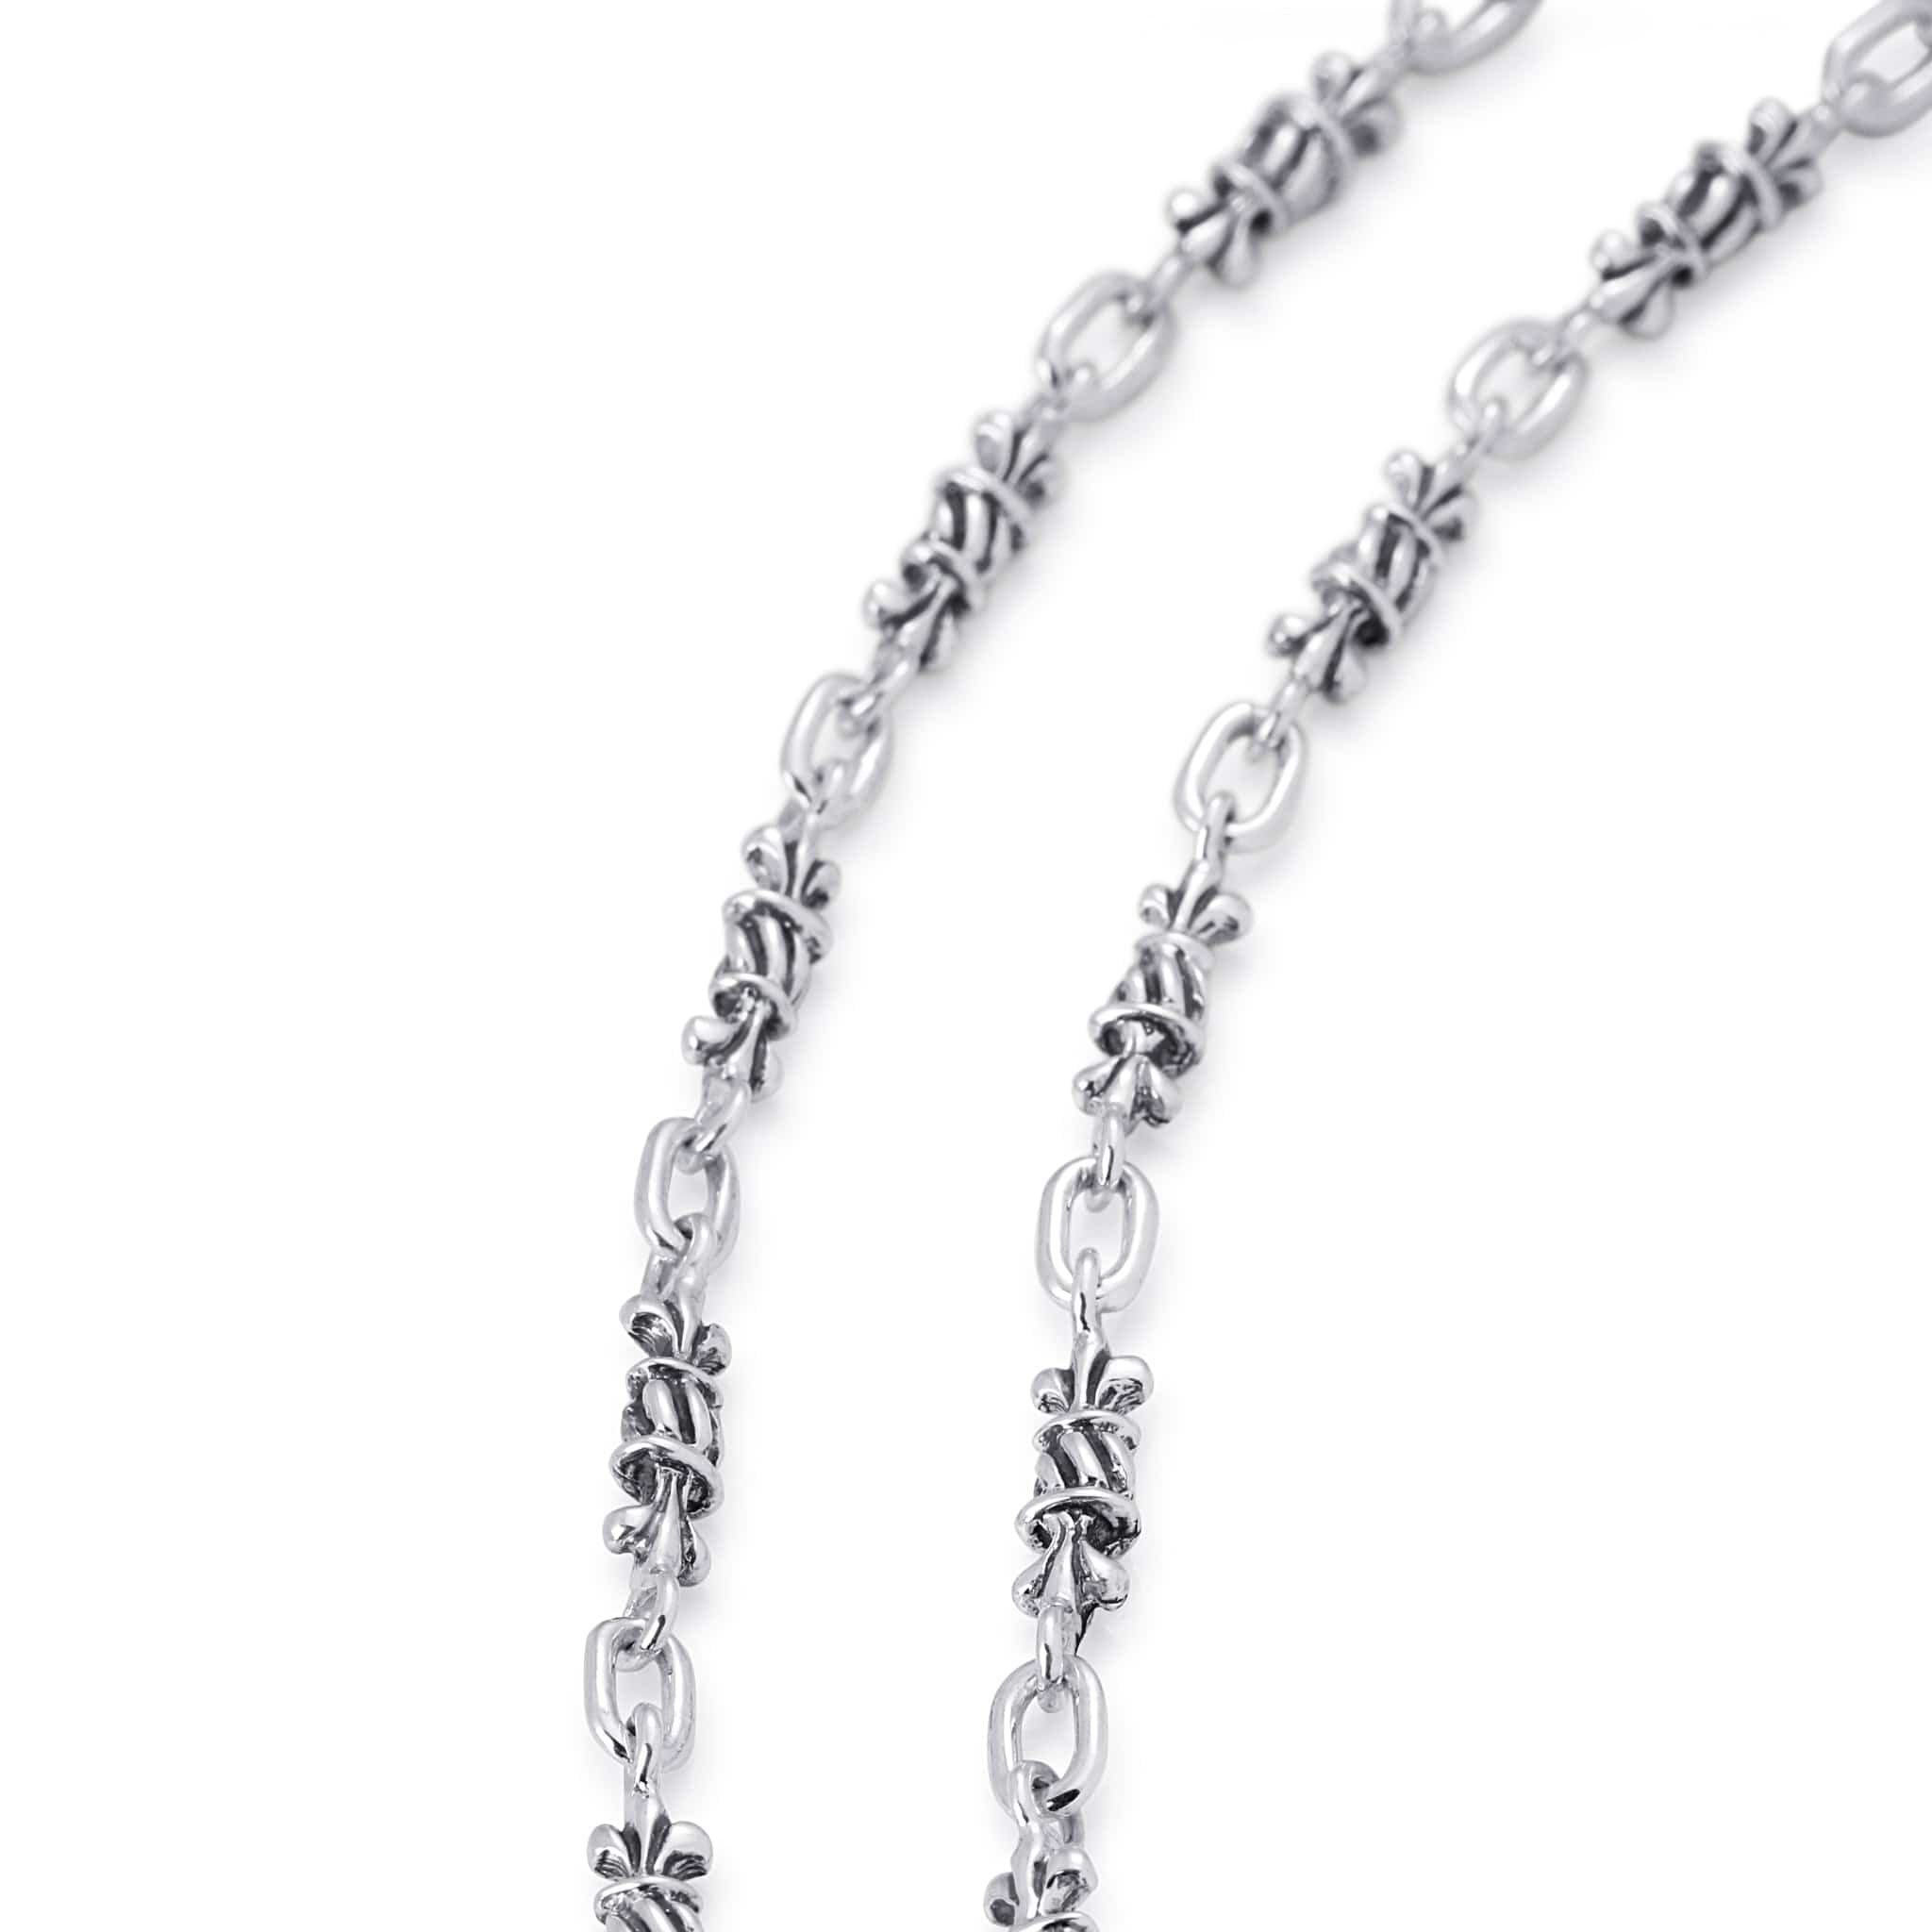 Solid Sterling Silver ornate chain